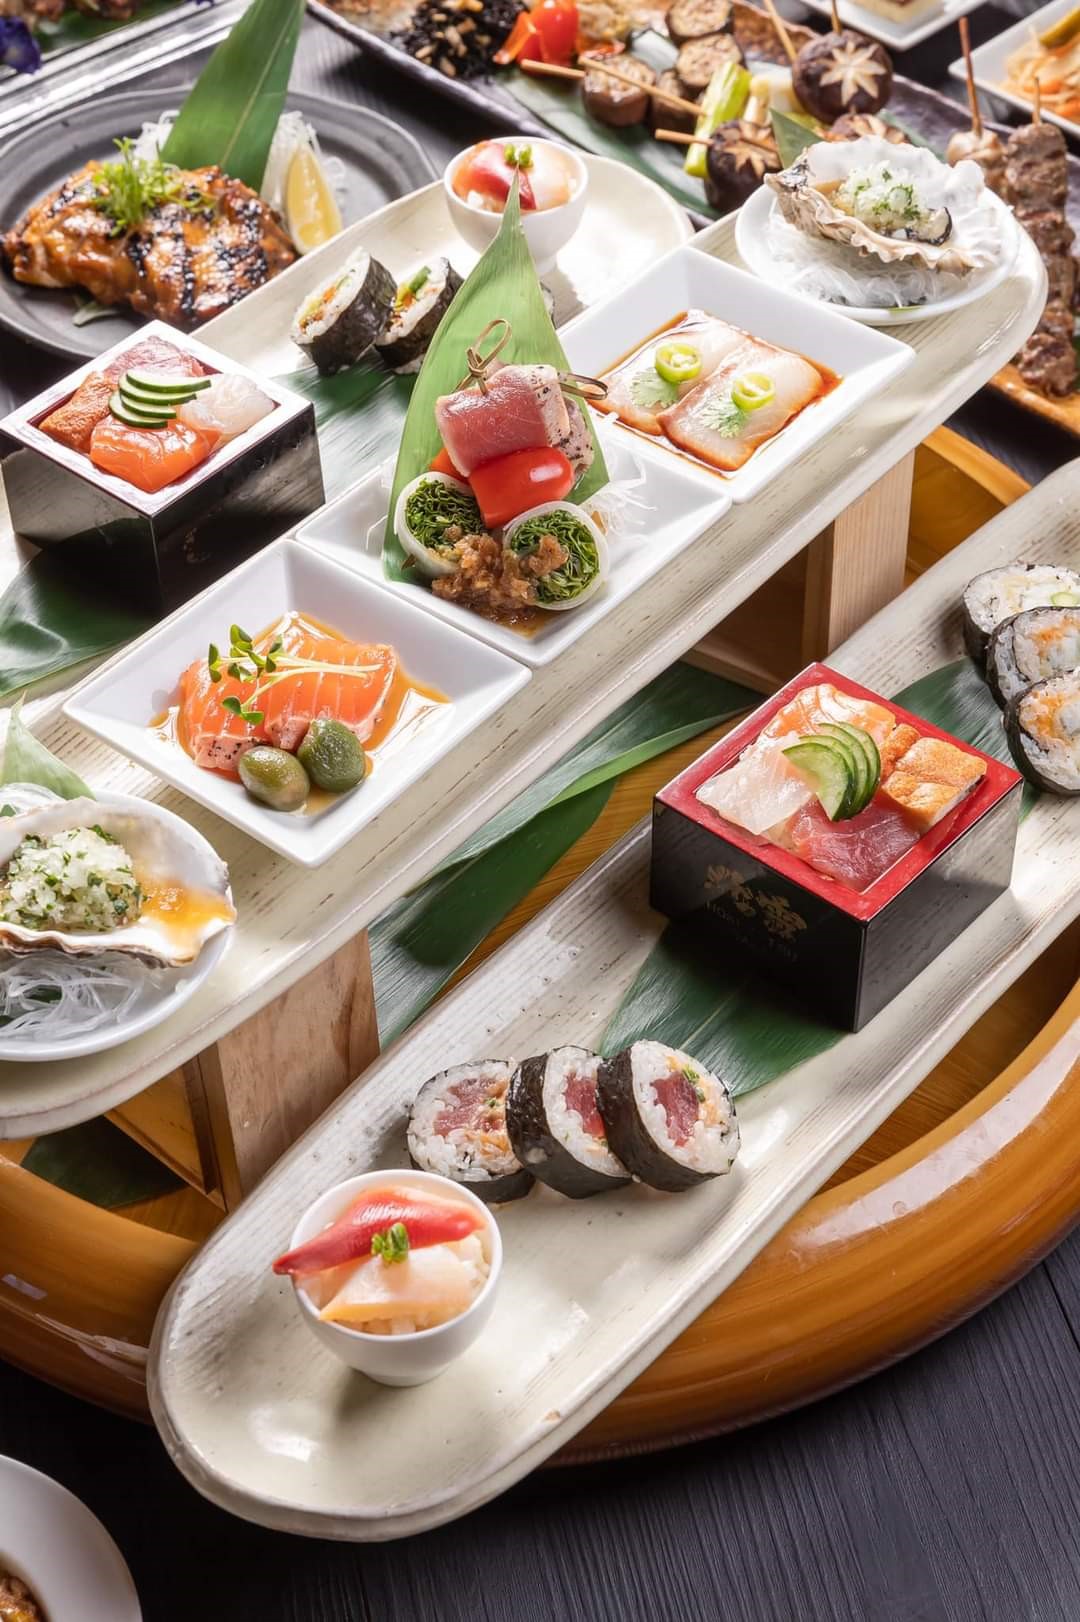   SUNDAY BRUNCH IS BACK   We are happy to announce the restarting of our Sunday Brunch for the whole year of 2022. Please enjoy our Nobu Style Buffet exclusive for Brunch service.   